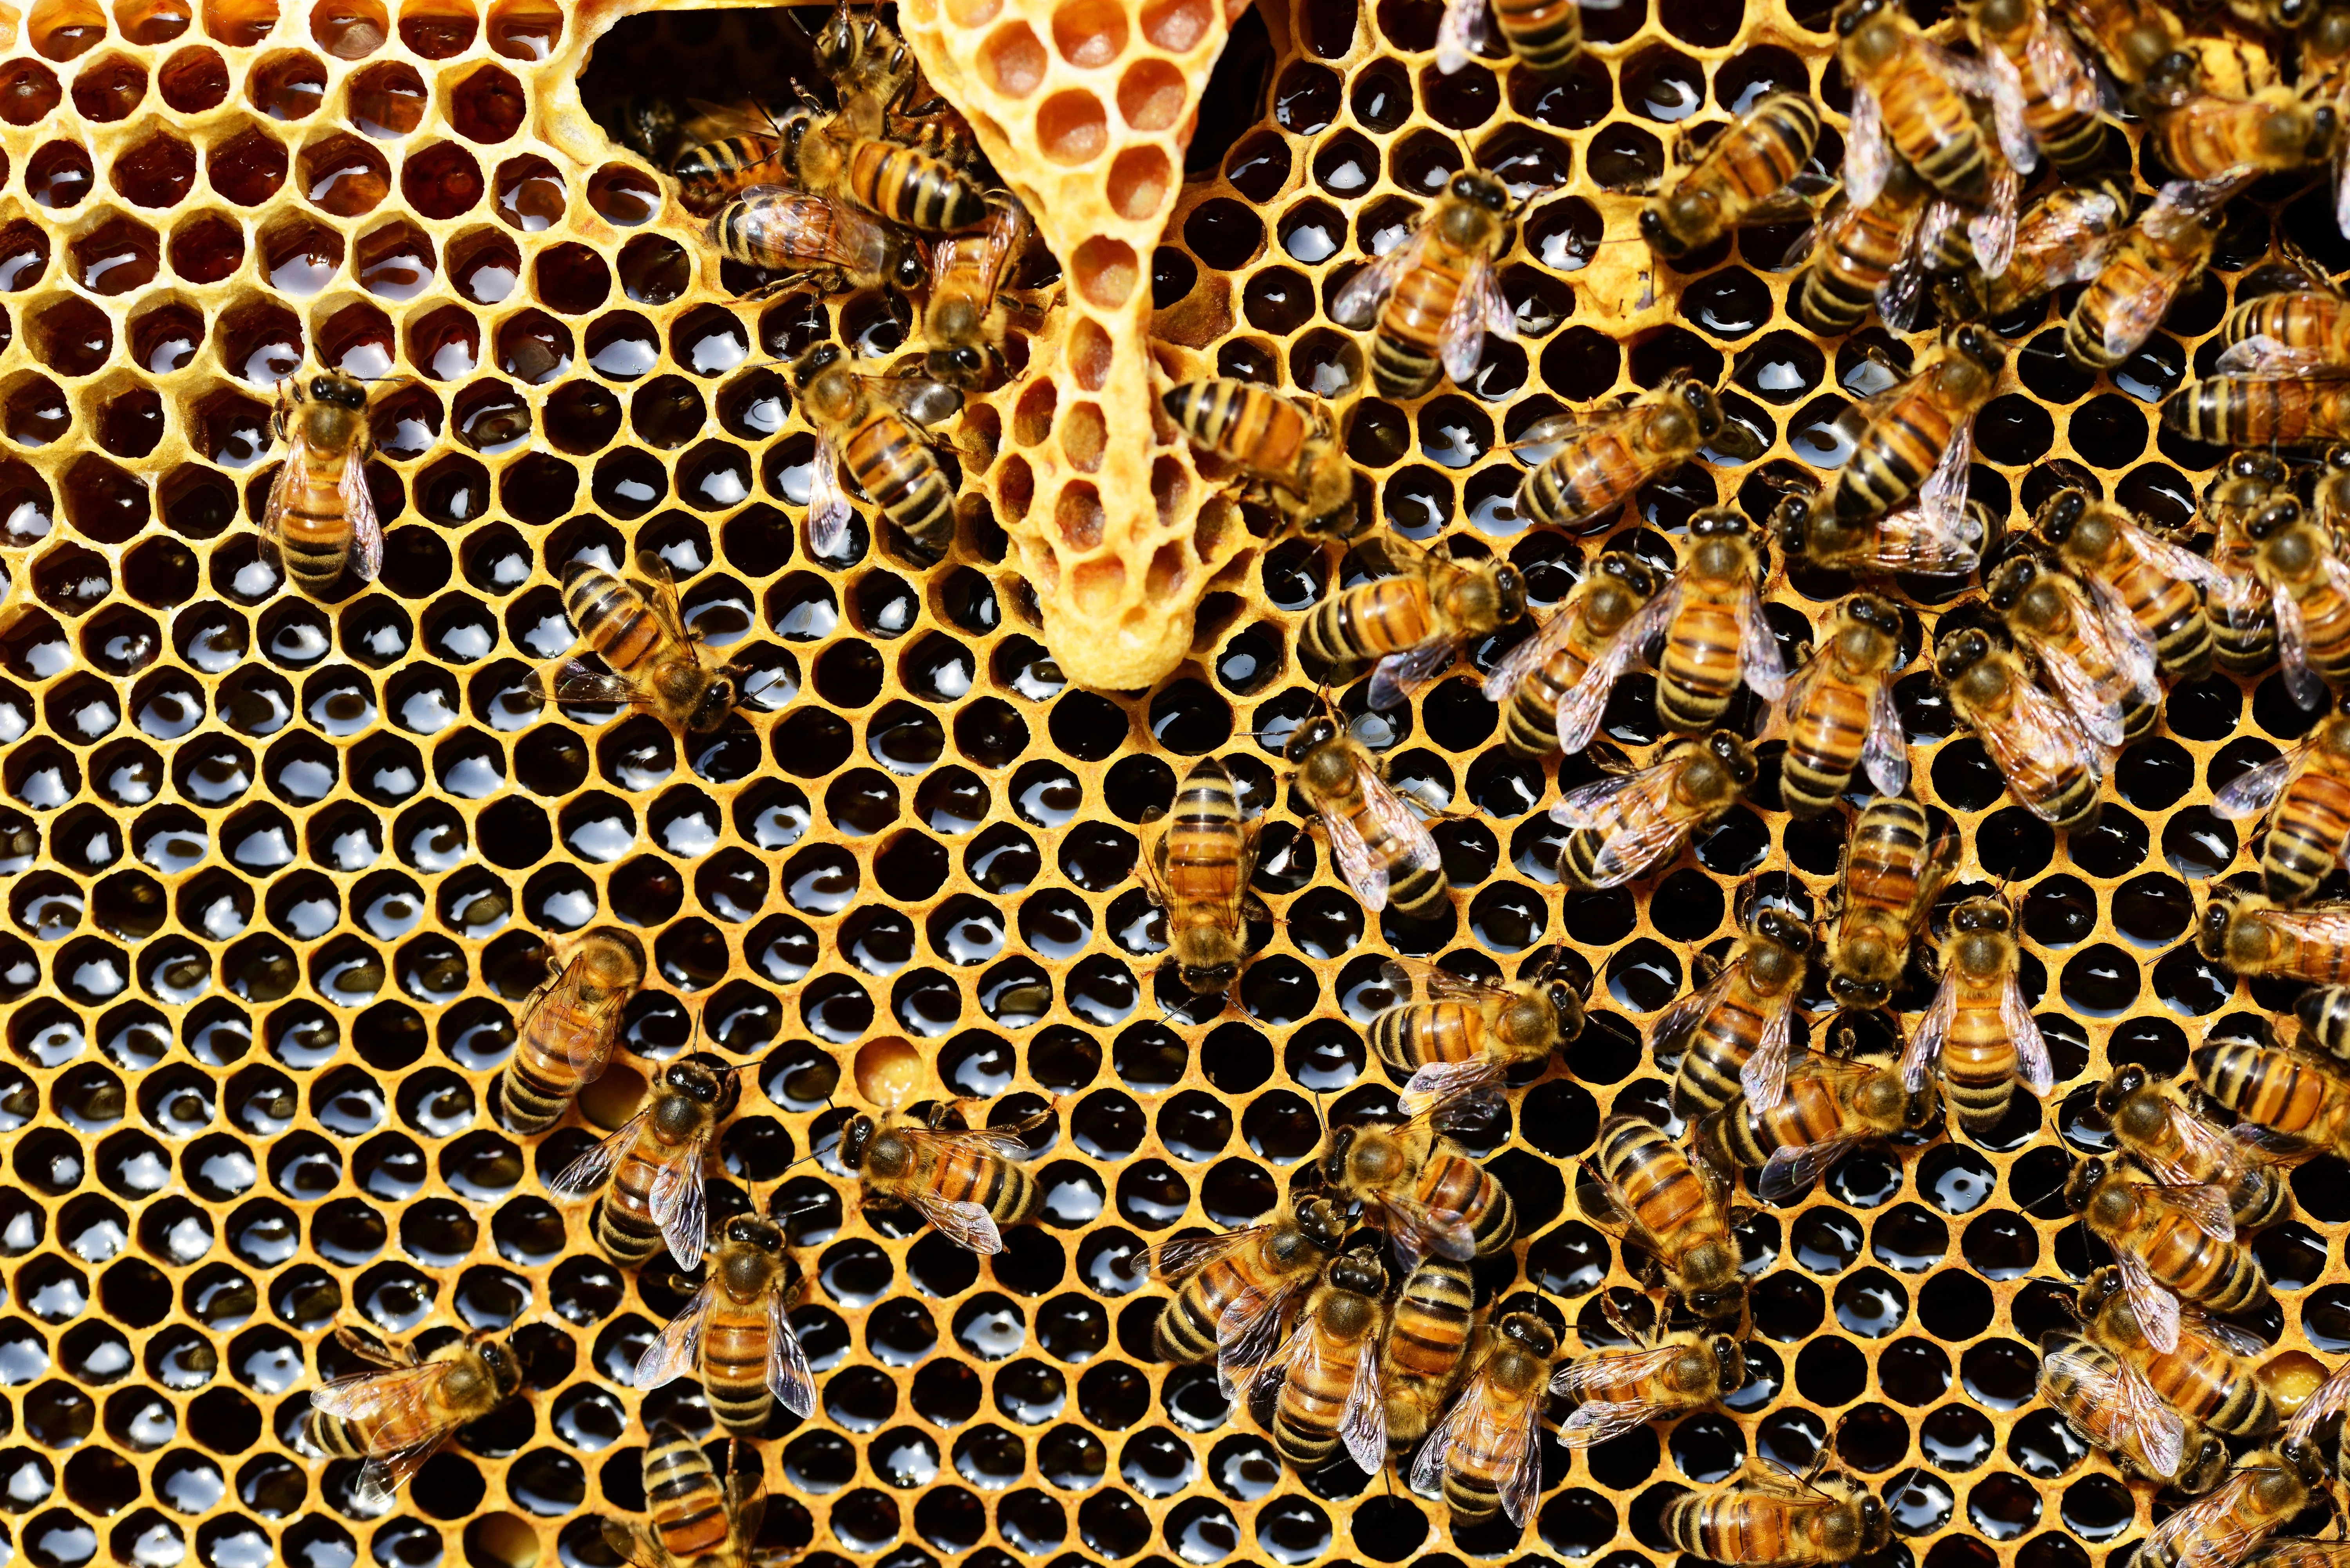 Global Decline in Bee Populations Reversed by New Conservation Efforts